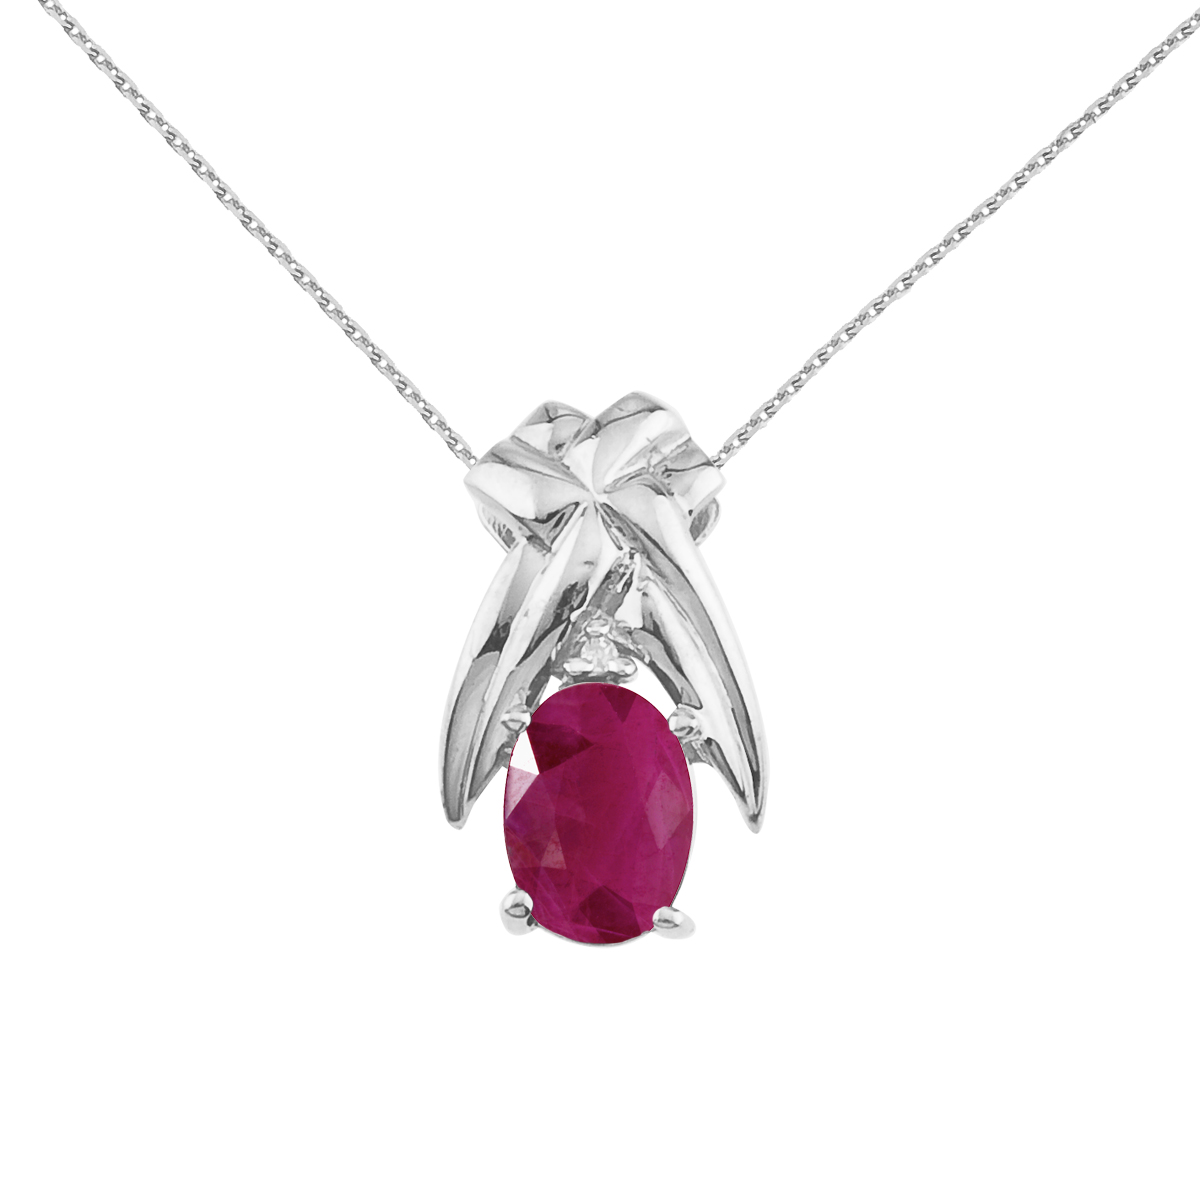 7x5 mm natural ruby and diamond accented pendant in 14k yellow gold.